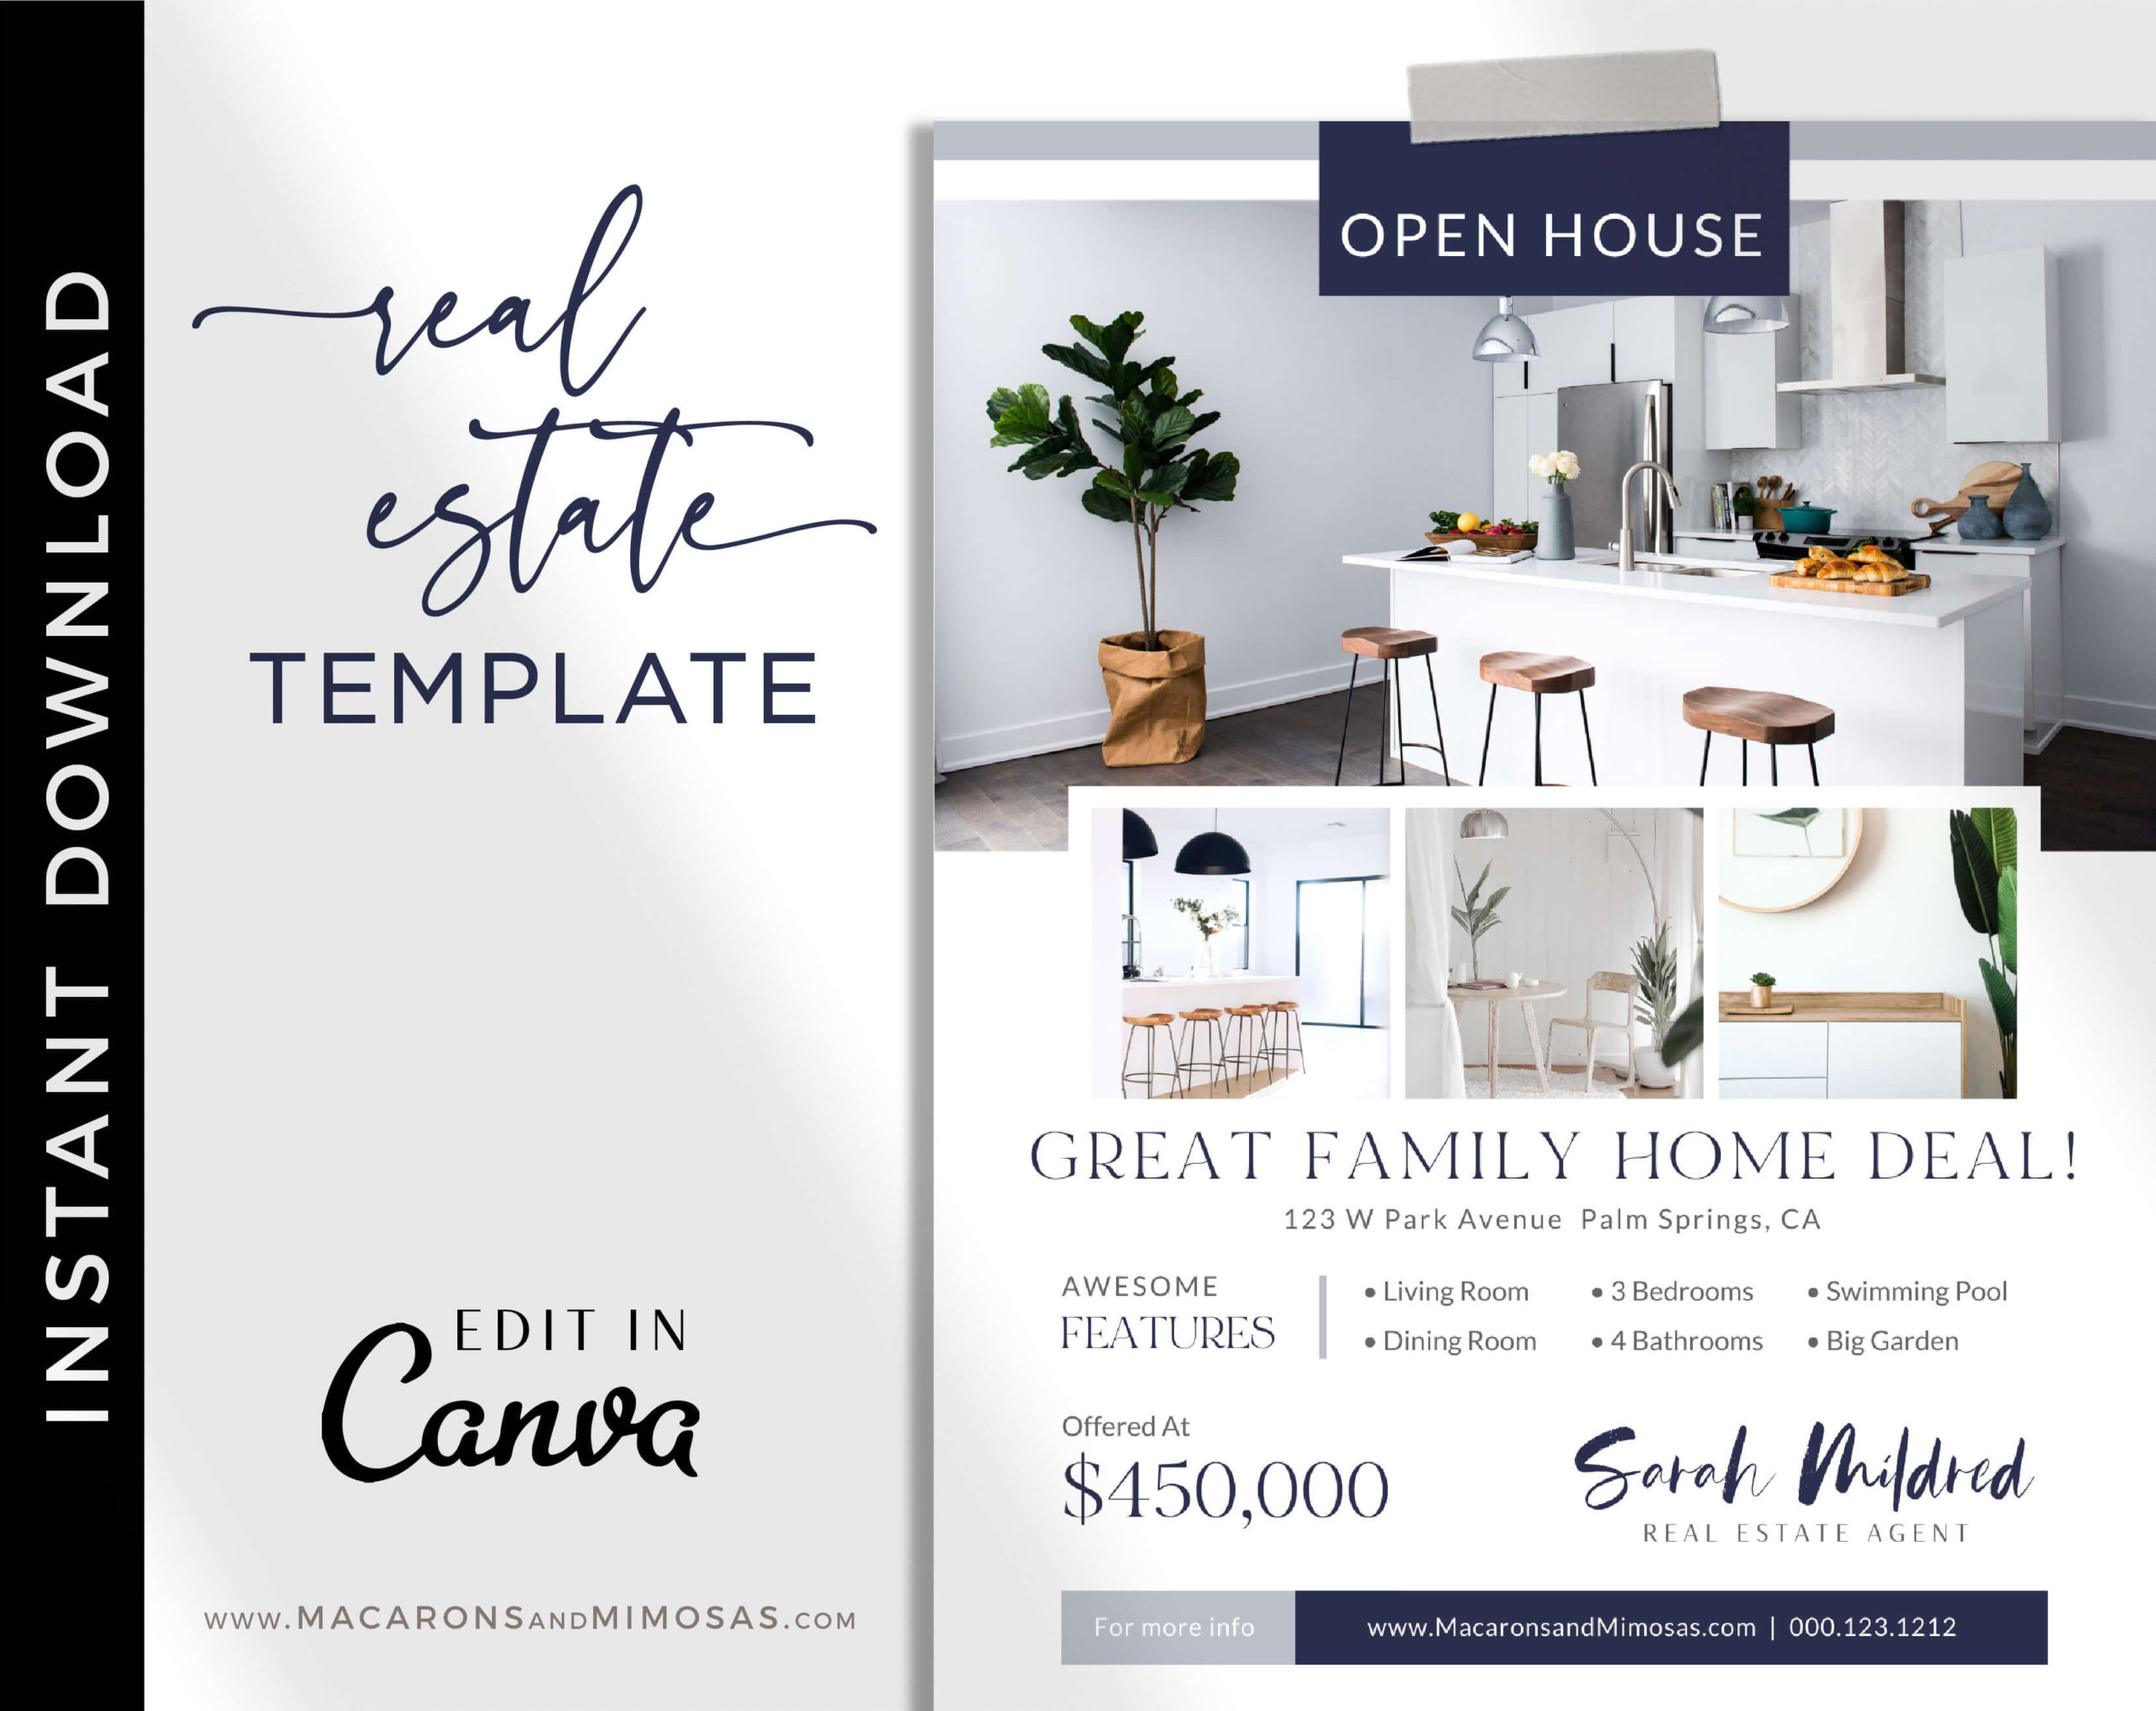 Real Estate Flyer Template, Canva Marketing Open House Listing Design, Just Listed Home Flyer Sheet, House for Sale Template